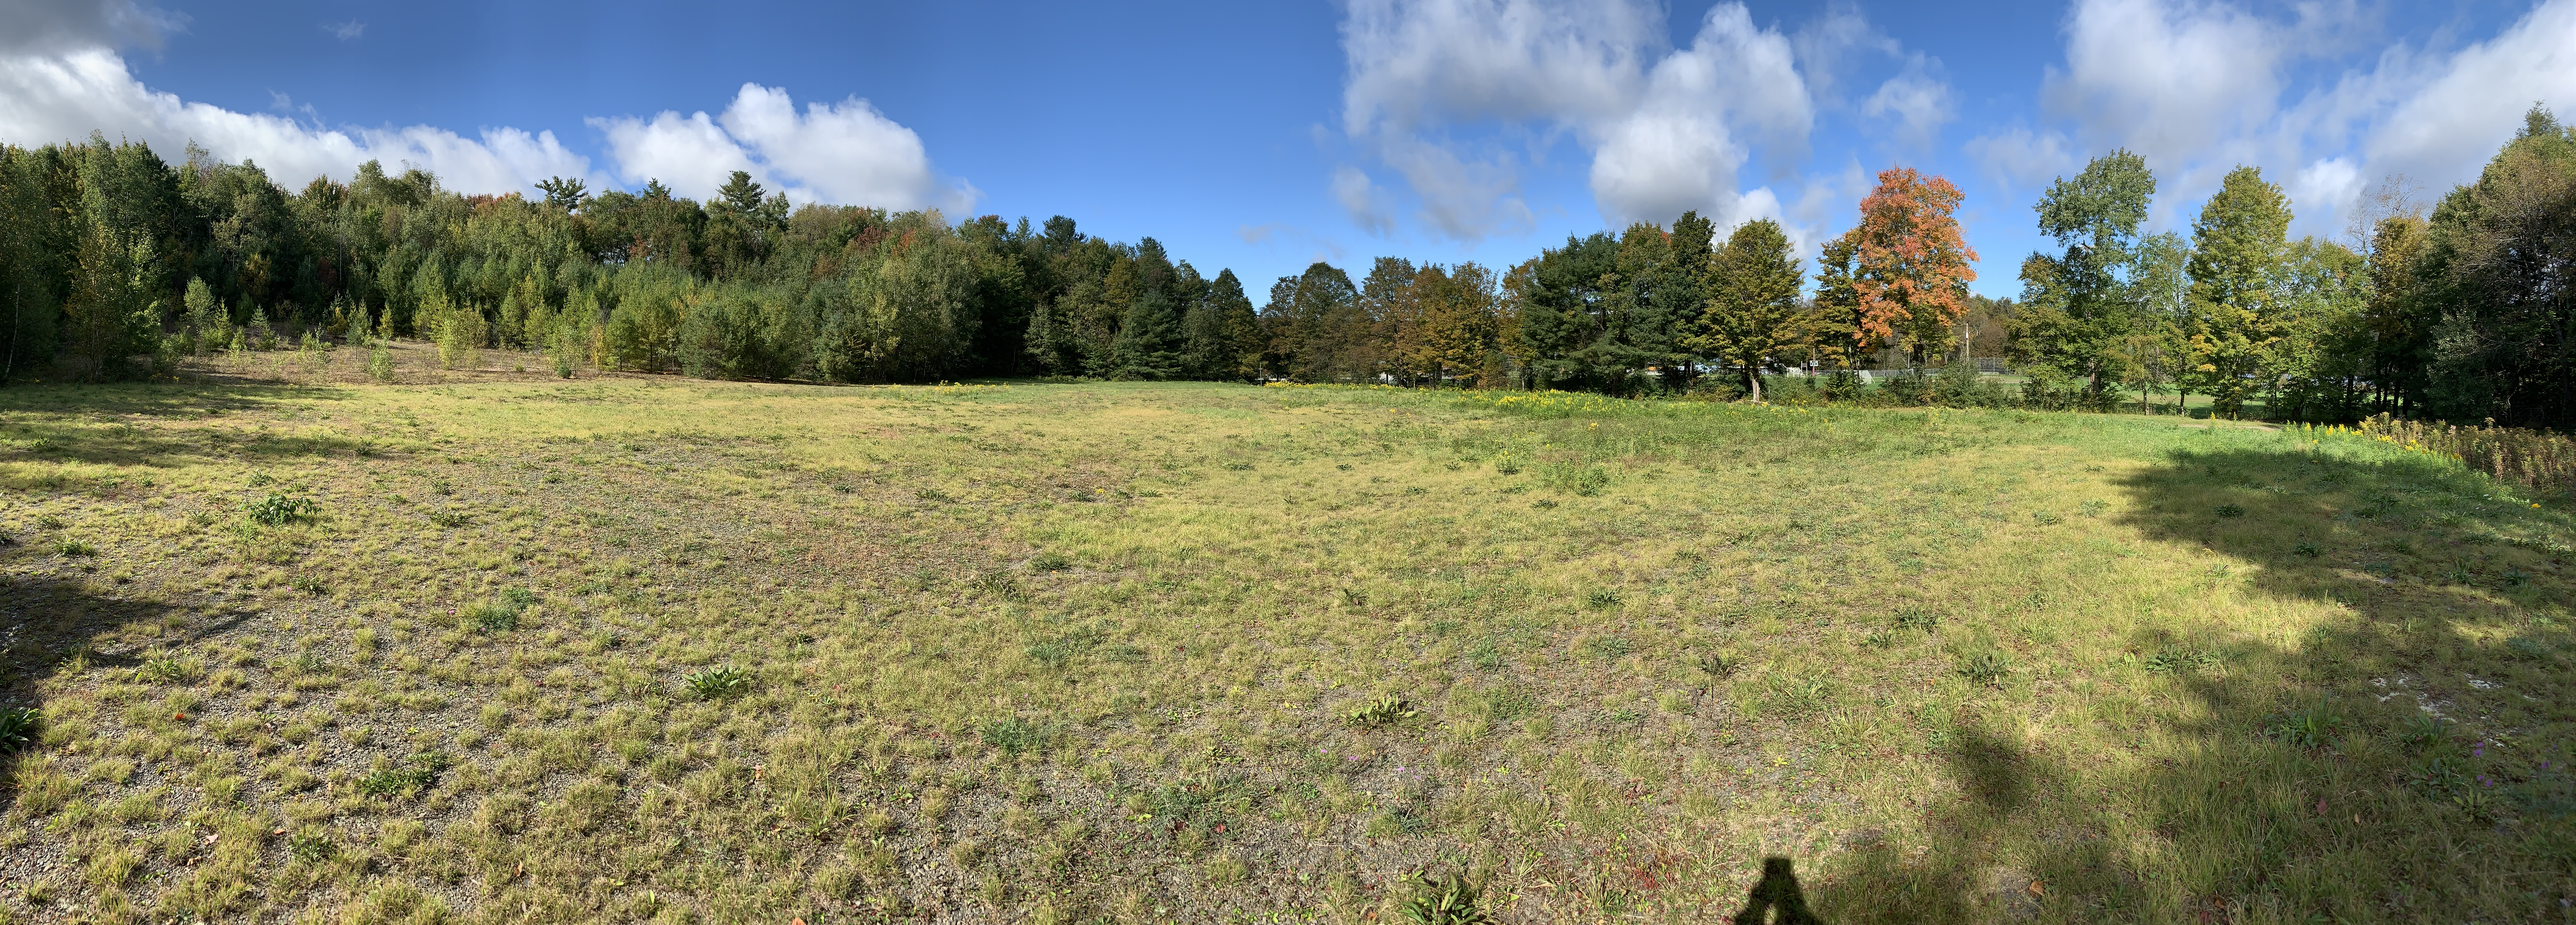 Panoramic Photo of new Little League Field Site 10-1-2021